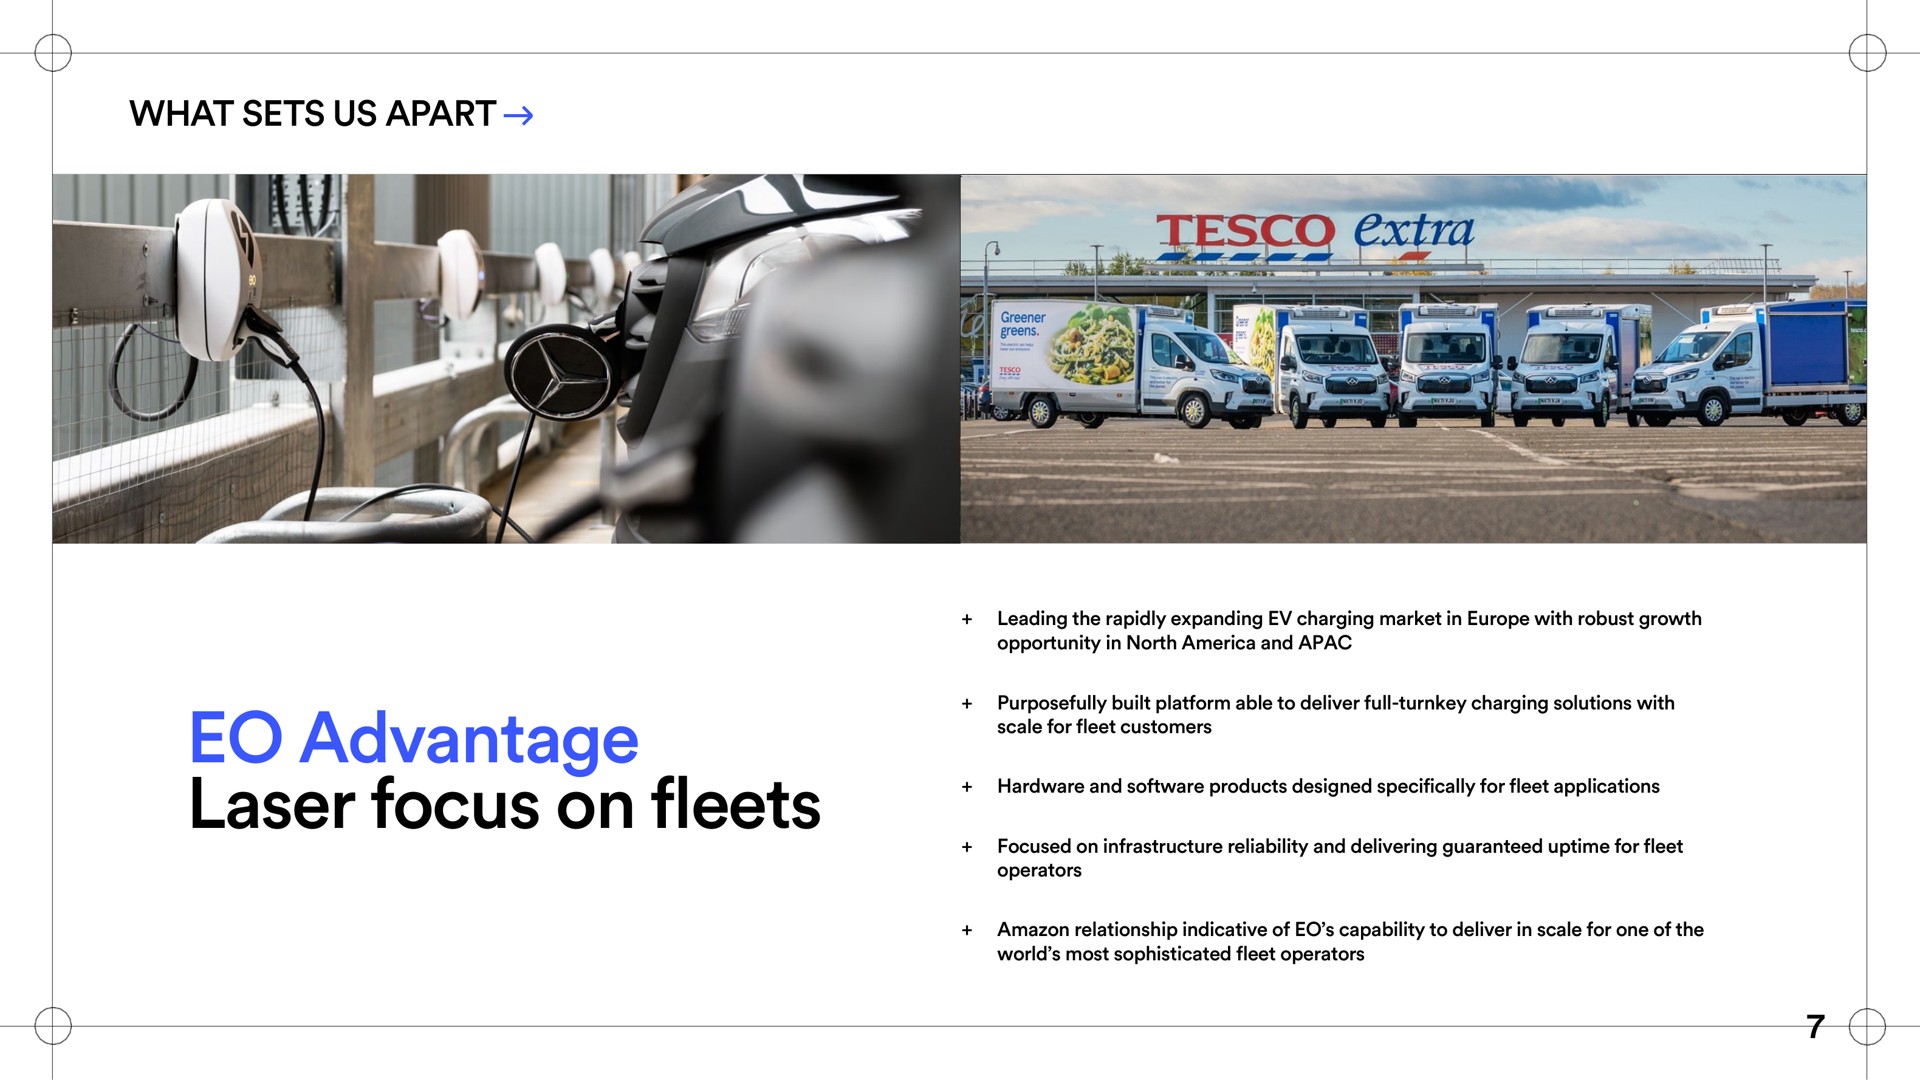 what sets us apart advantage laser focus on fleets a scale for fleet customers | EO Charging